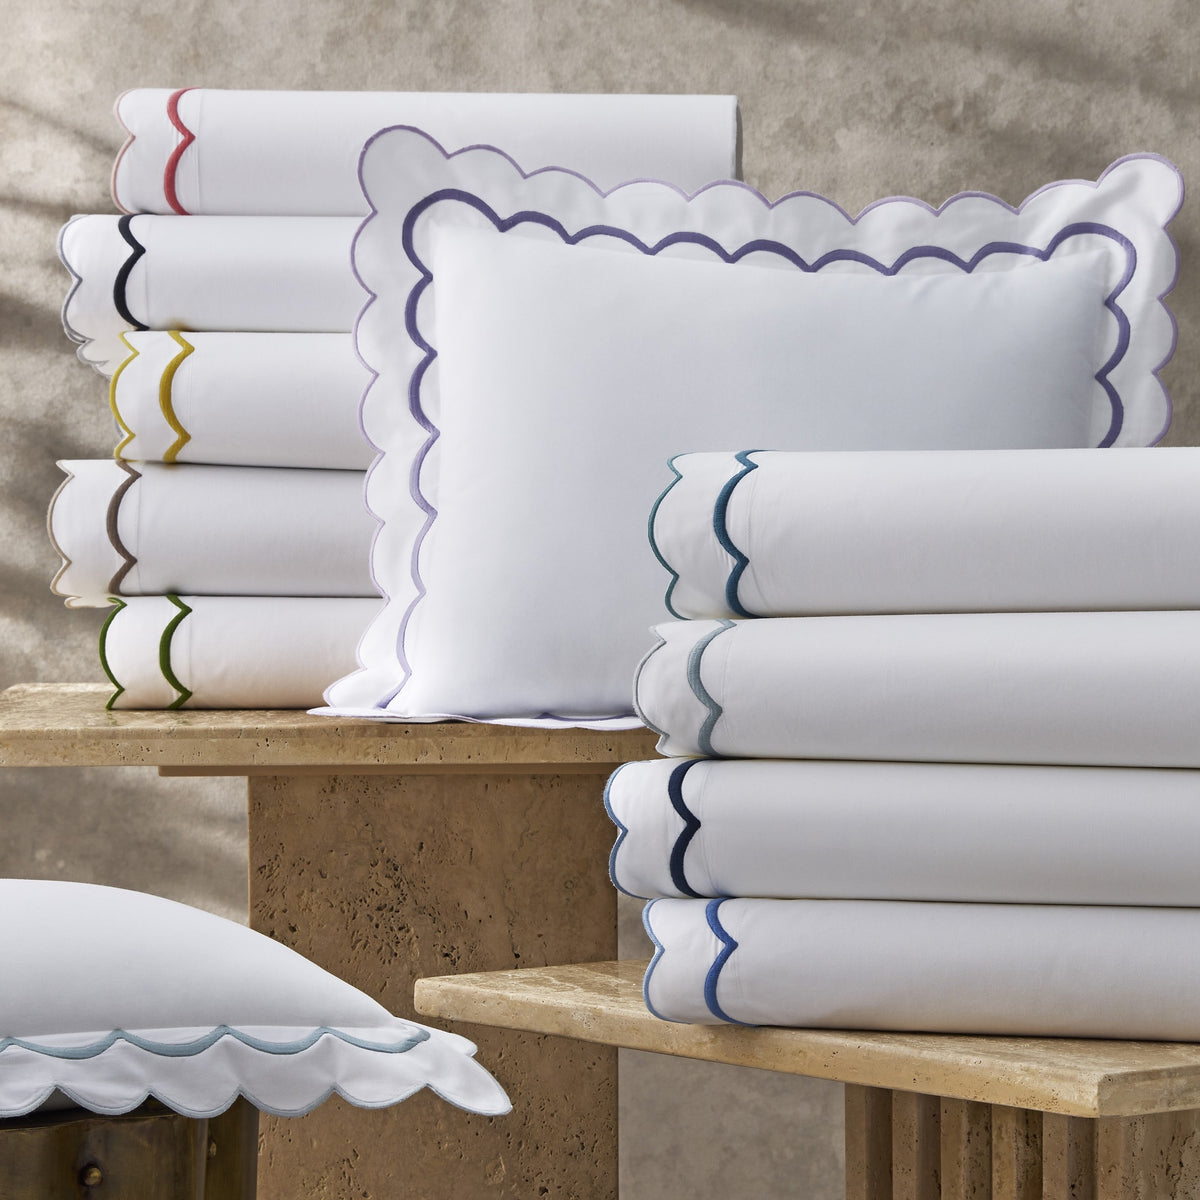 Stack of Matouk India Bedding in Different Colors